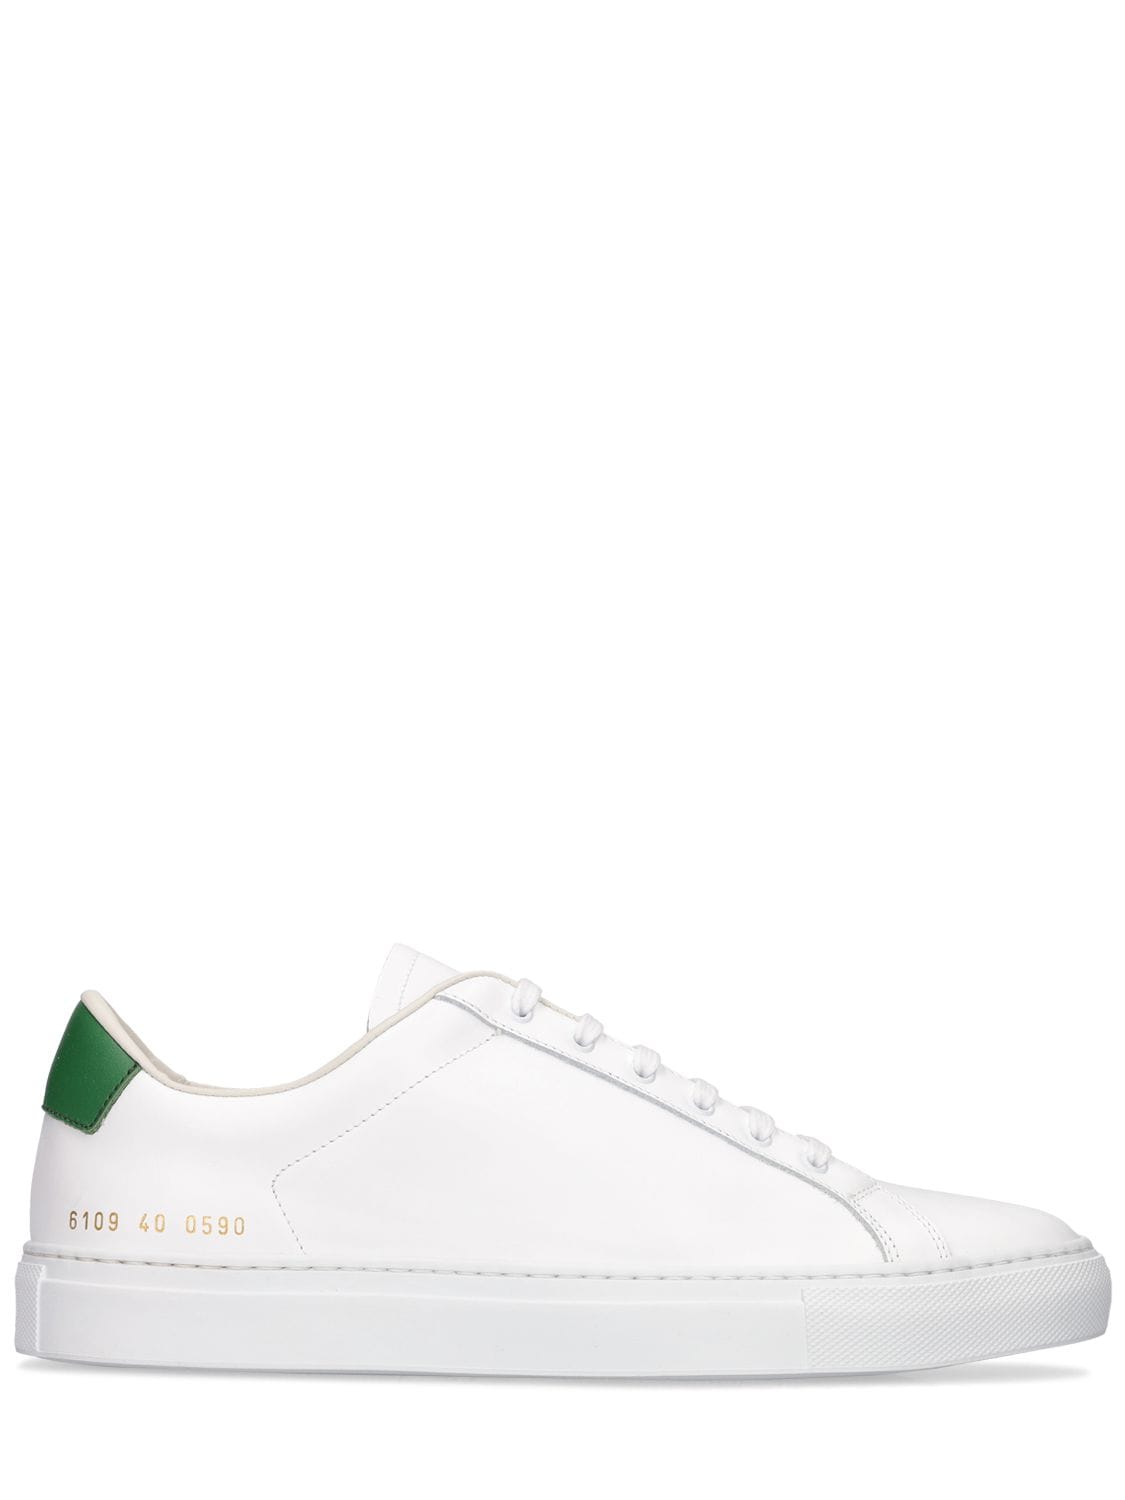 COMMON PROJECTS 20MM RETRO LOW LEATHER SNEAKERS